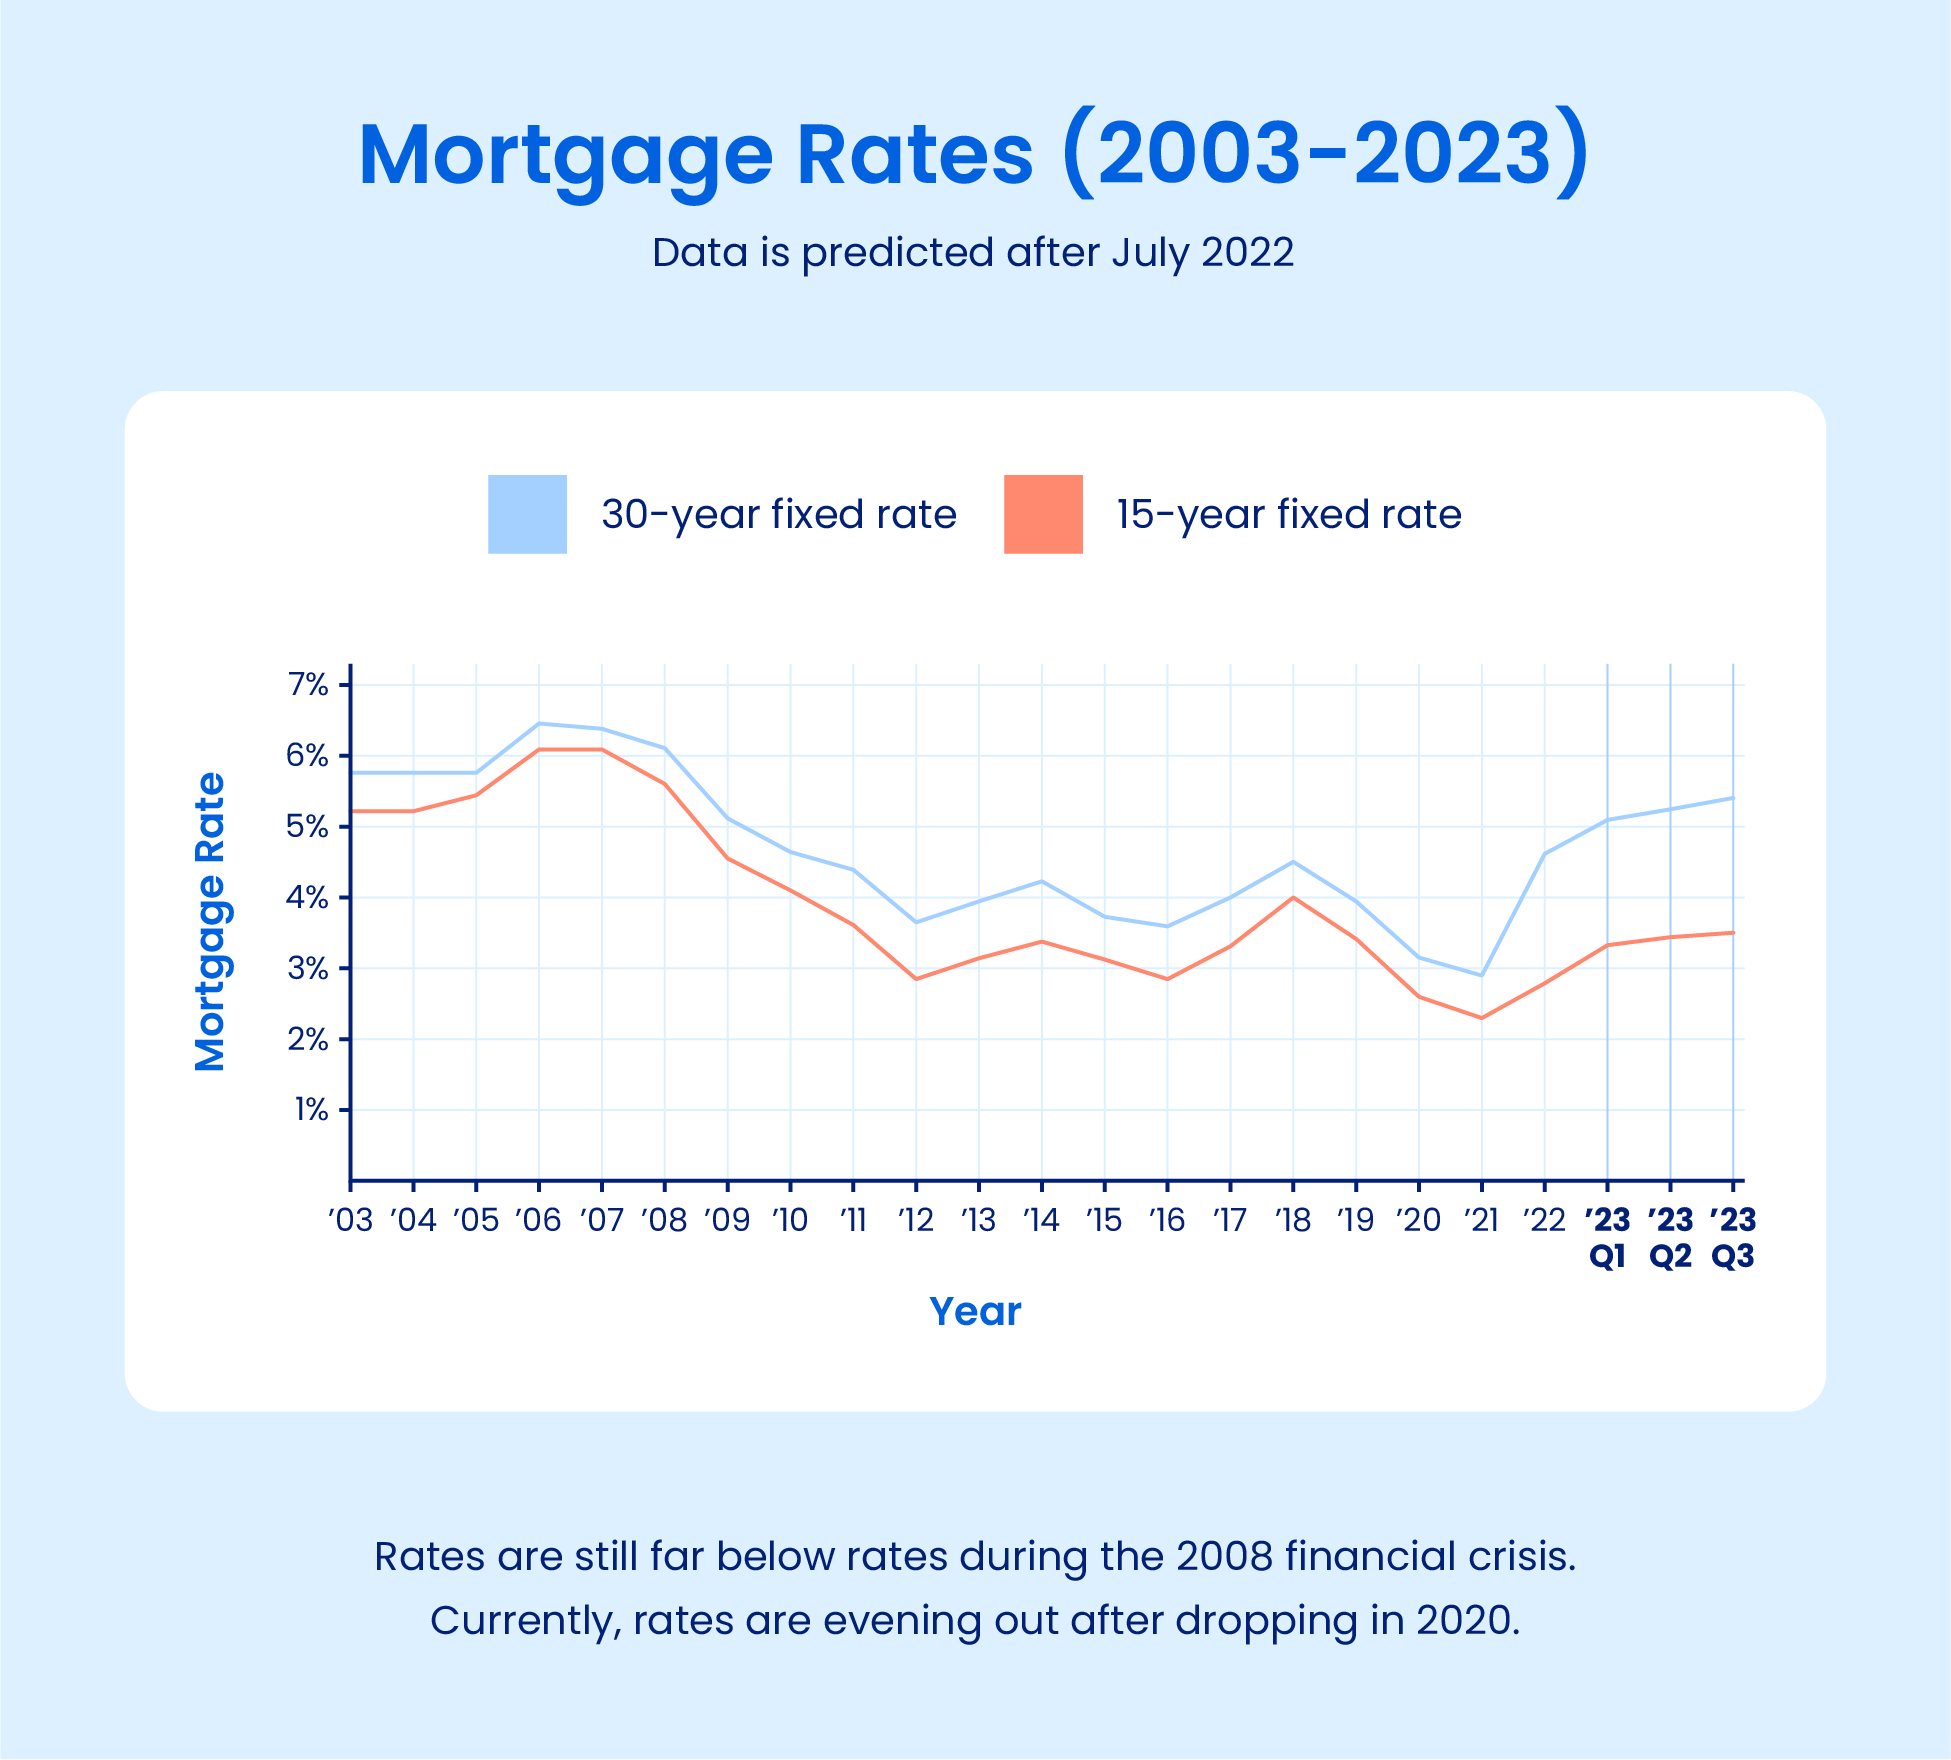 Will mortgage rates cause a housing market crash or prices to go down?